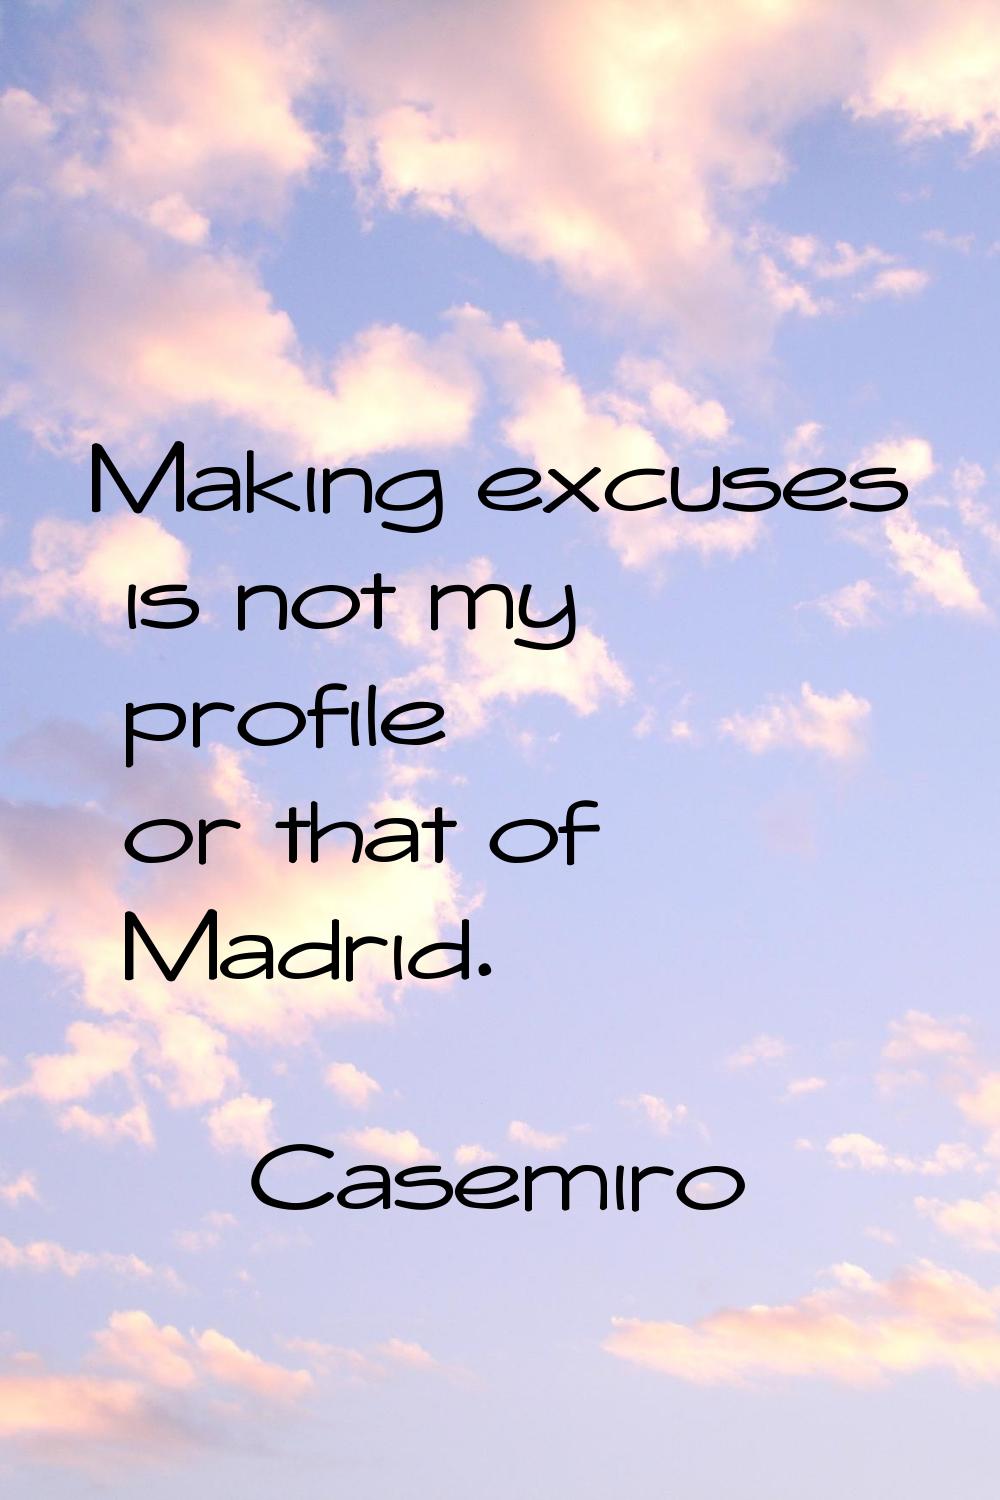 Making excuses is not my profile or that of Madrid.